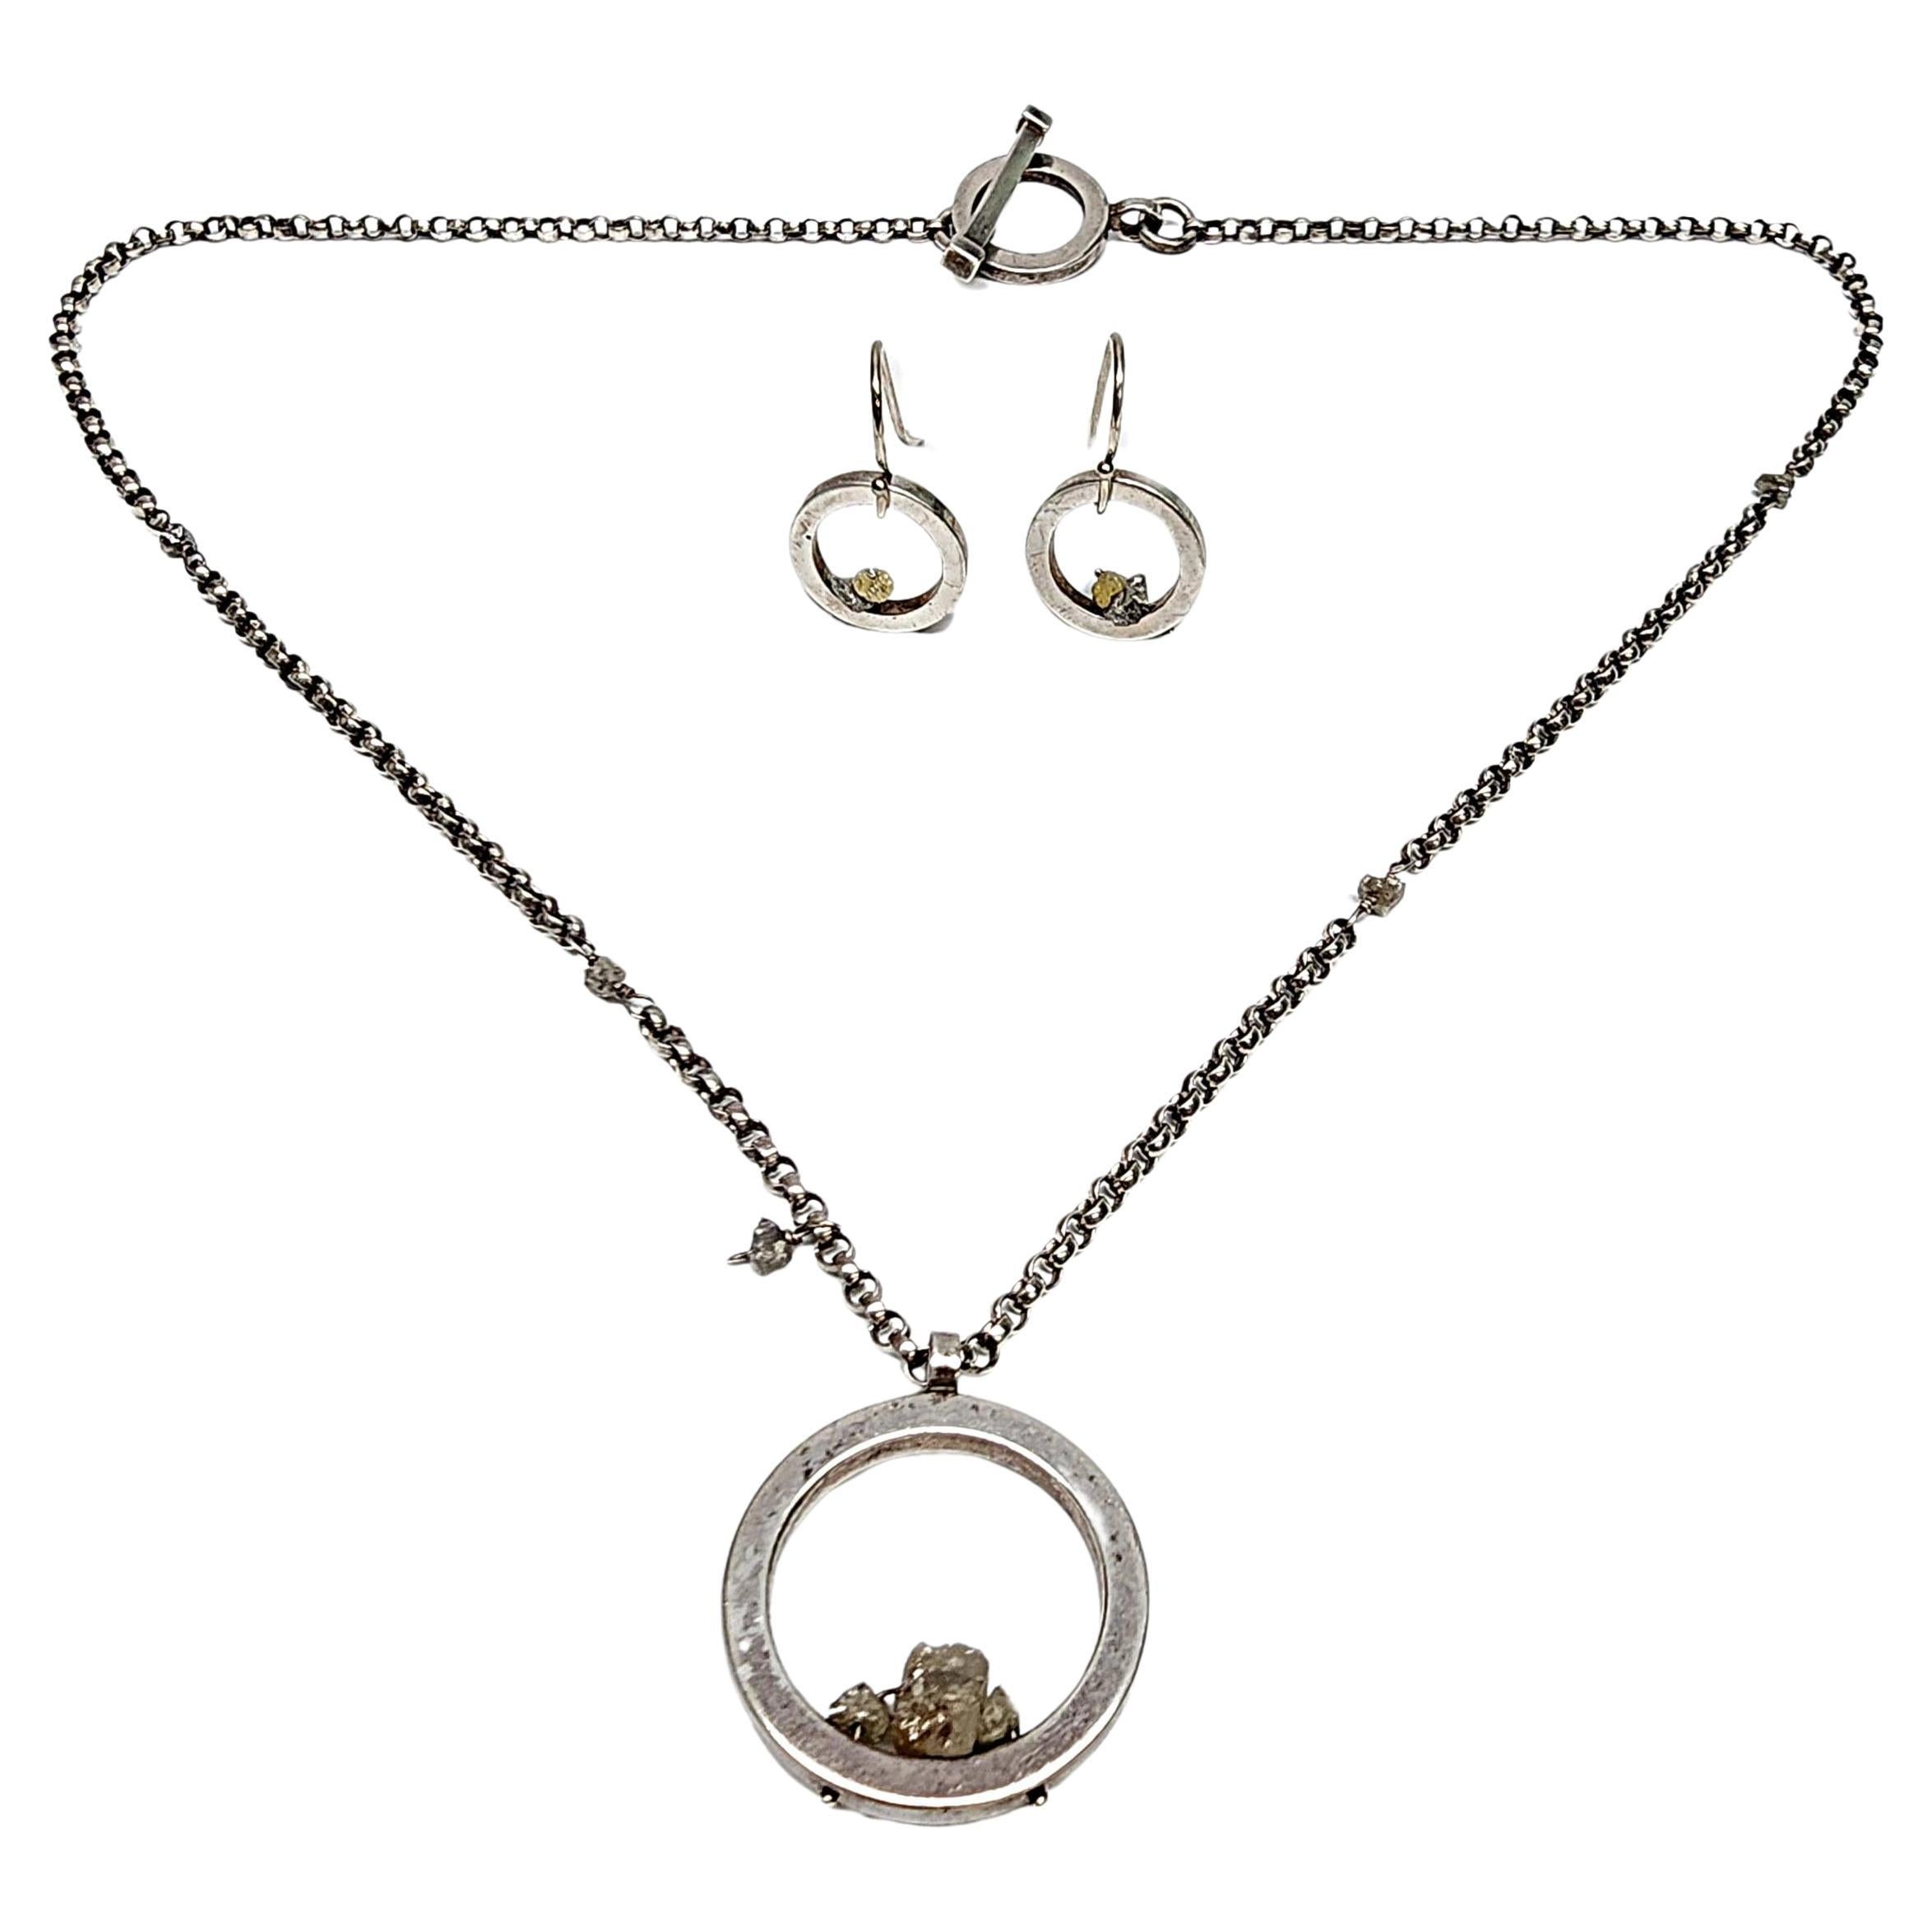 Mignon Faget Sterling Silver Circle With Stones Necklace & Earrings Set #16601 For Sale